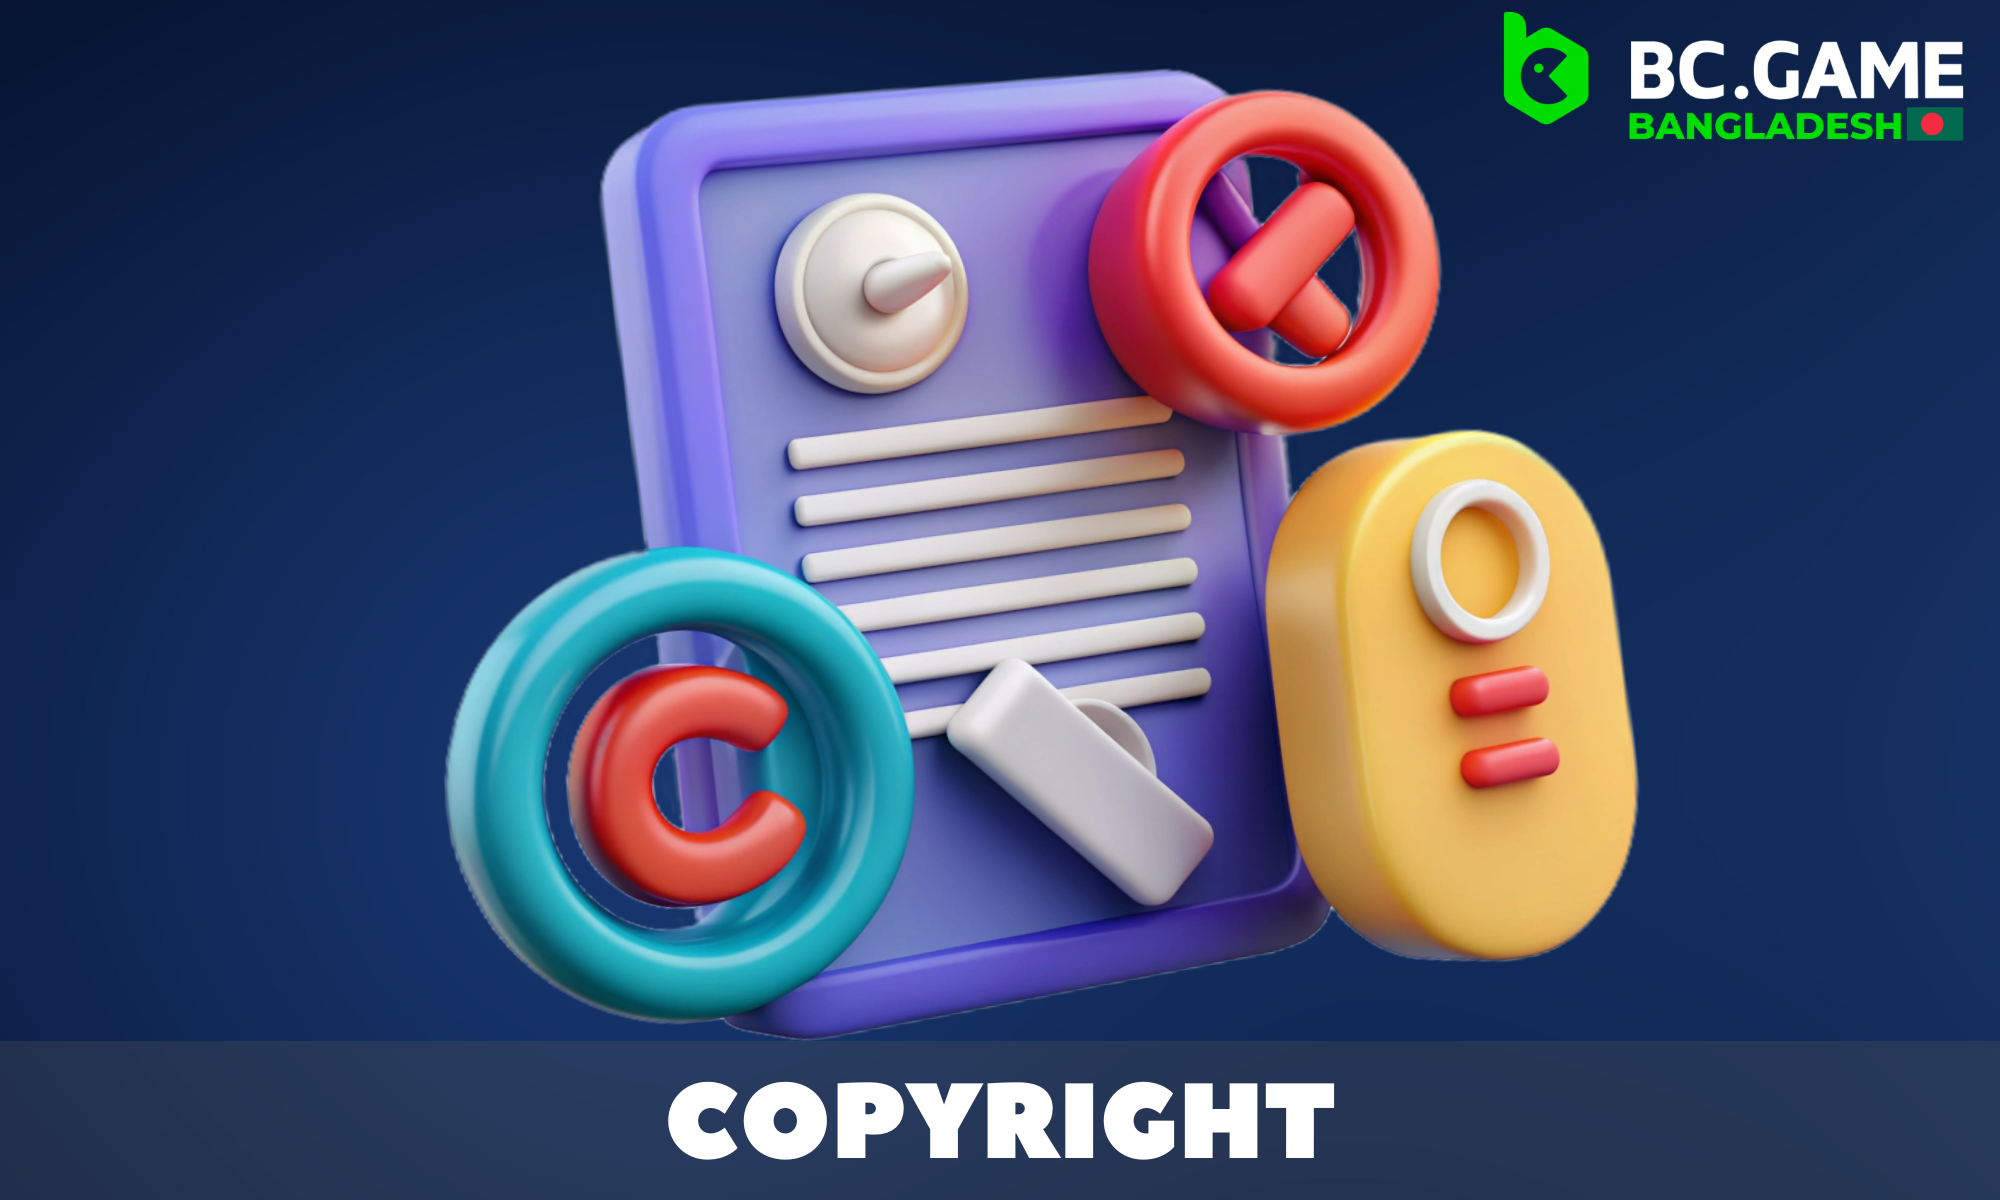 Detailed information about copyright in BC.GAME Bangladesh